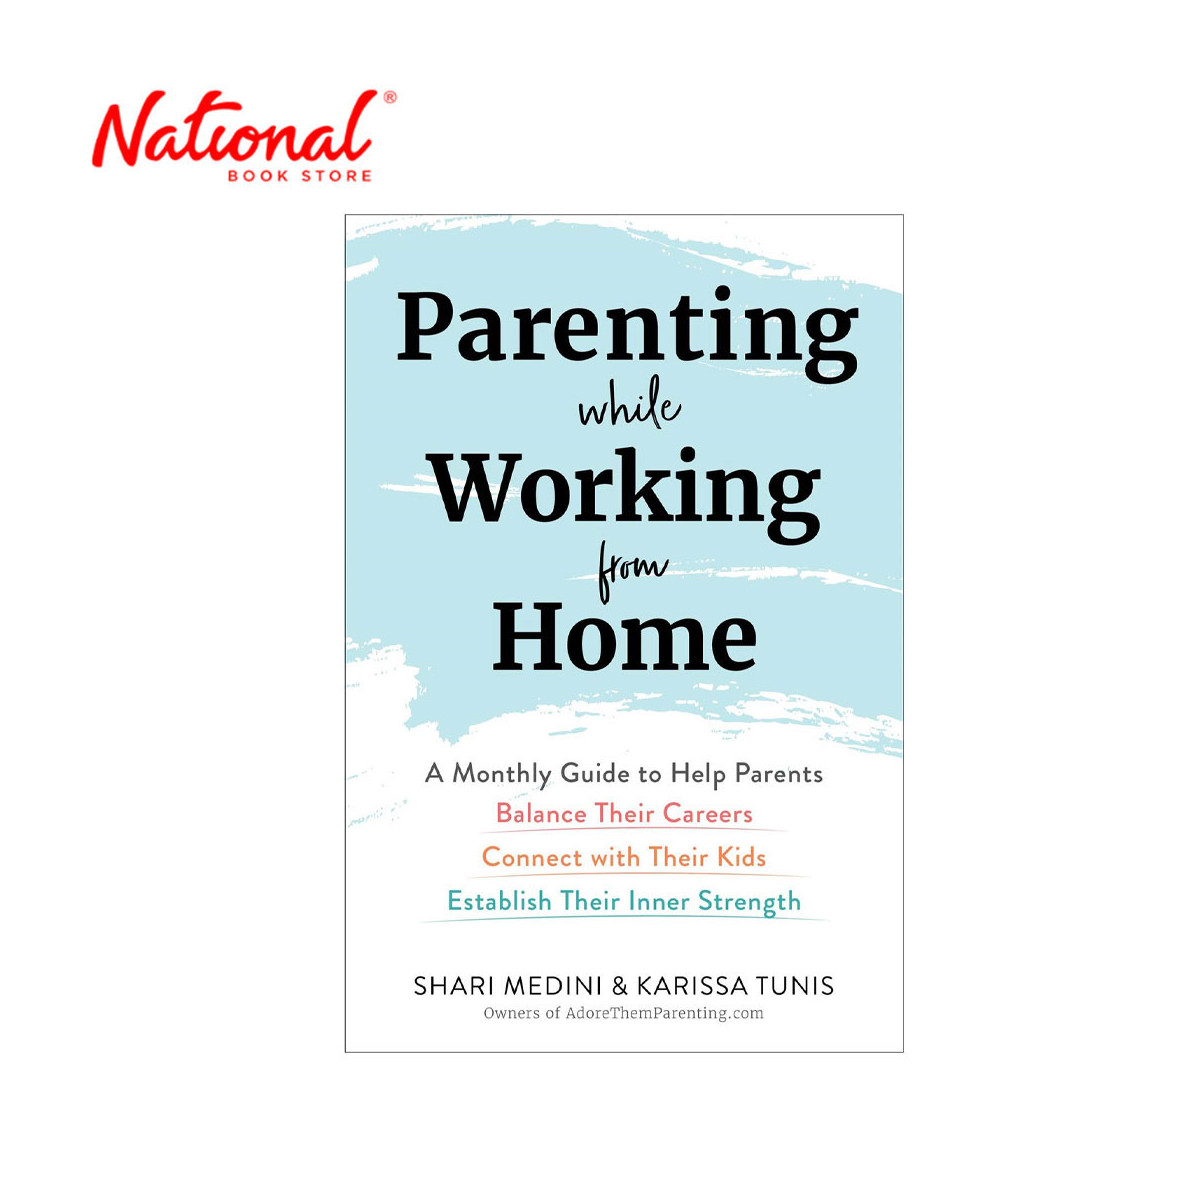 Parenting While Working from Home by Karissa Tunis Trade Paperback - Health & Fitness